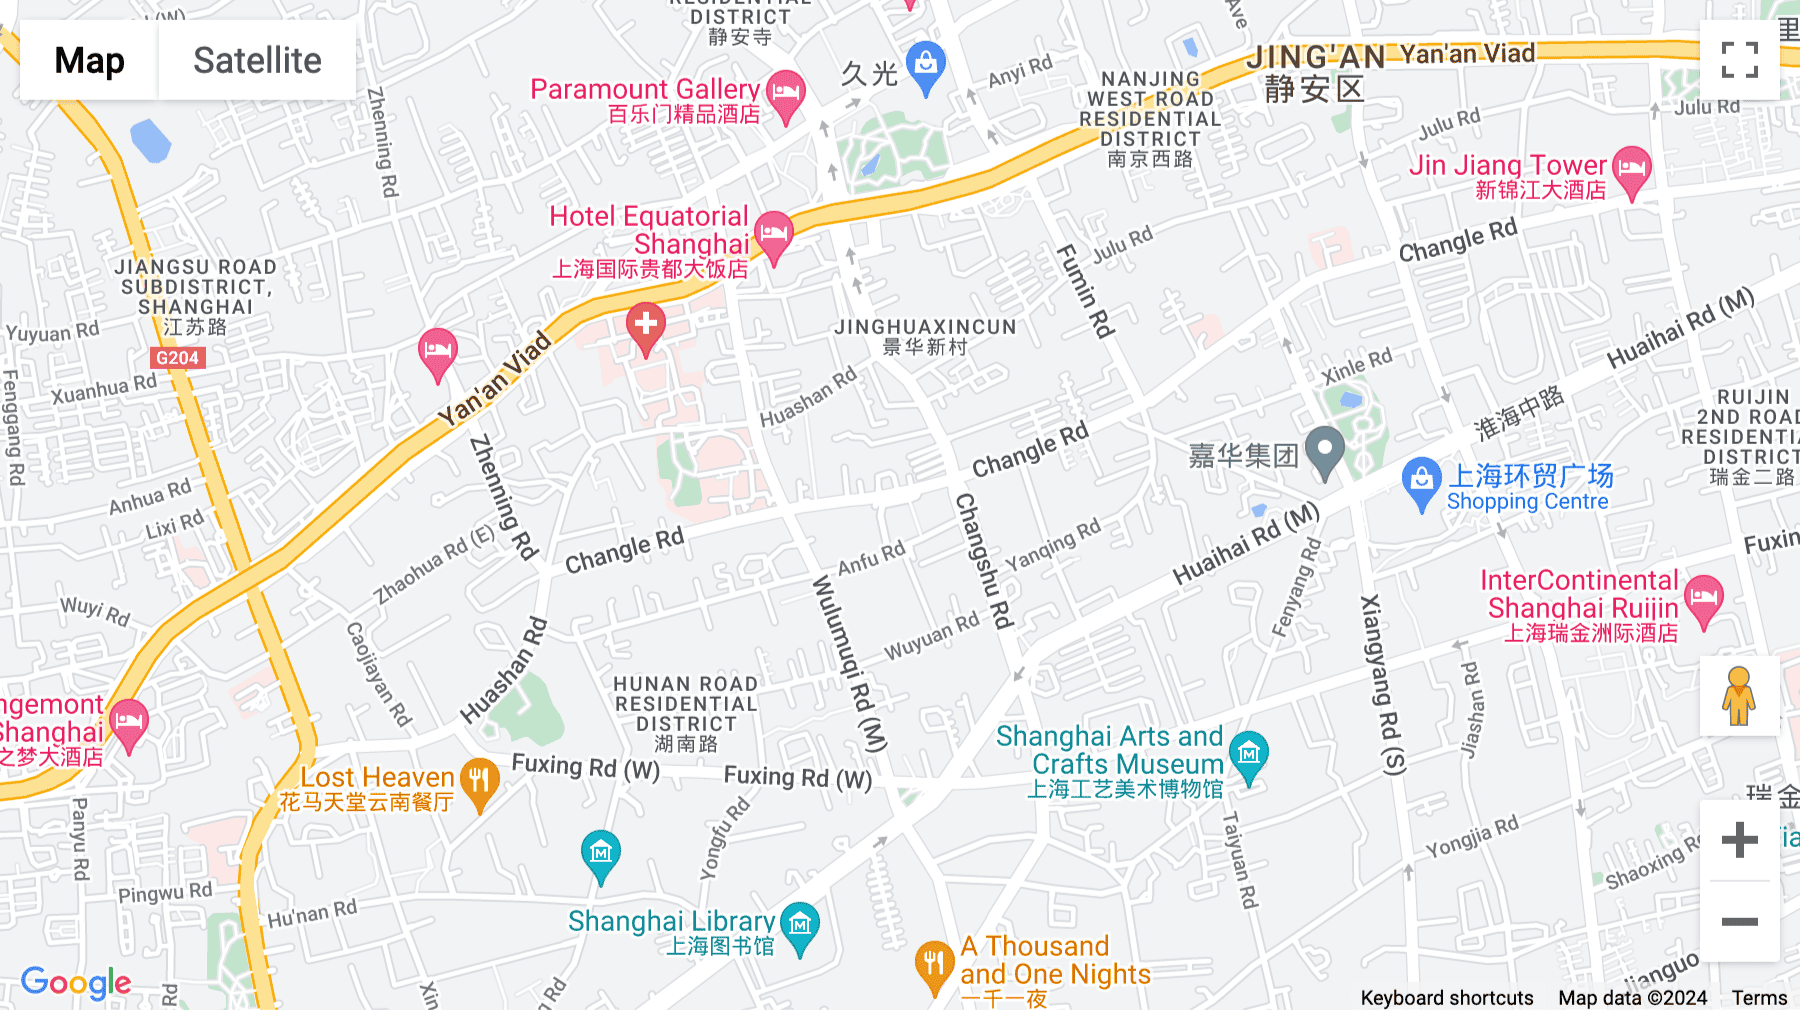 Click for interative map of WeWork The Center, 989 Changle Road, Xuhui, Shanghai